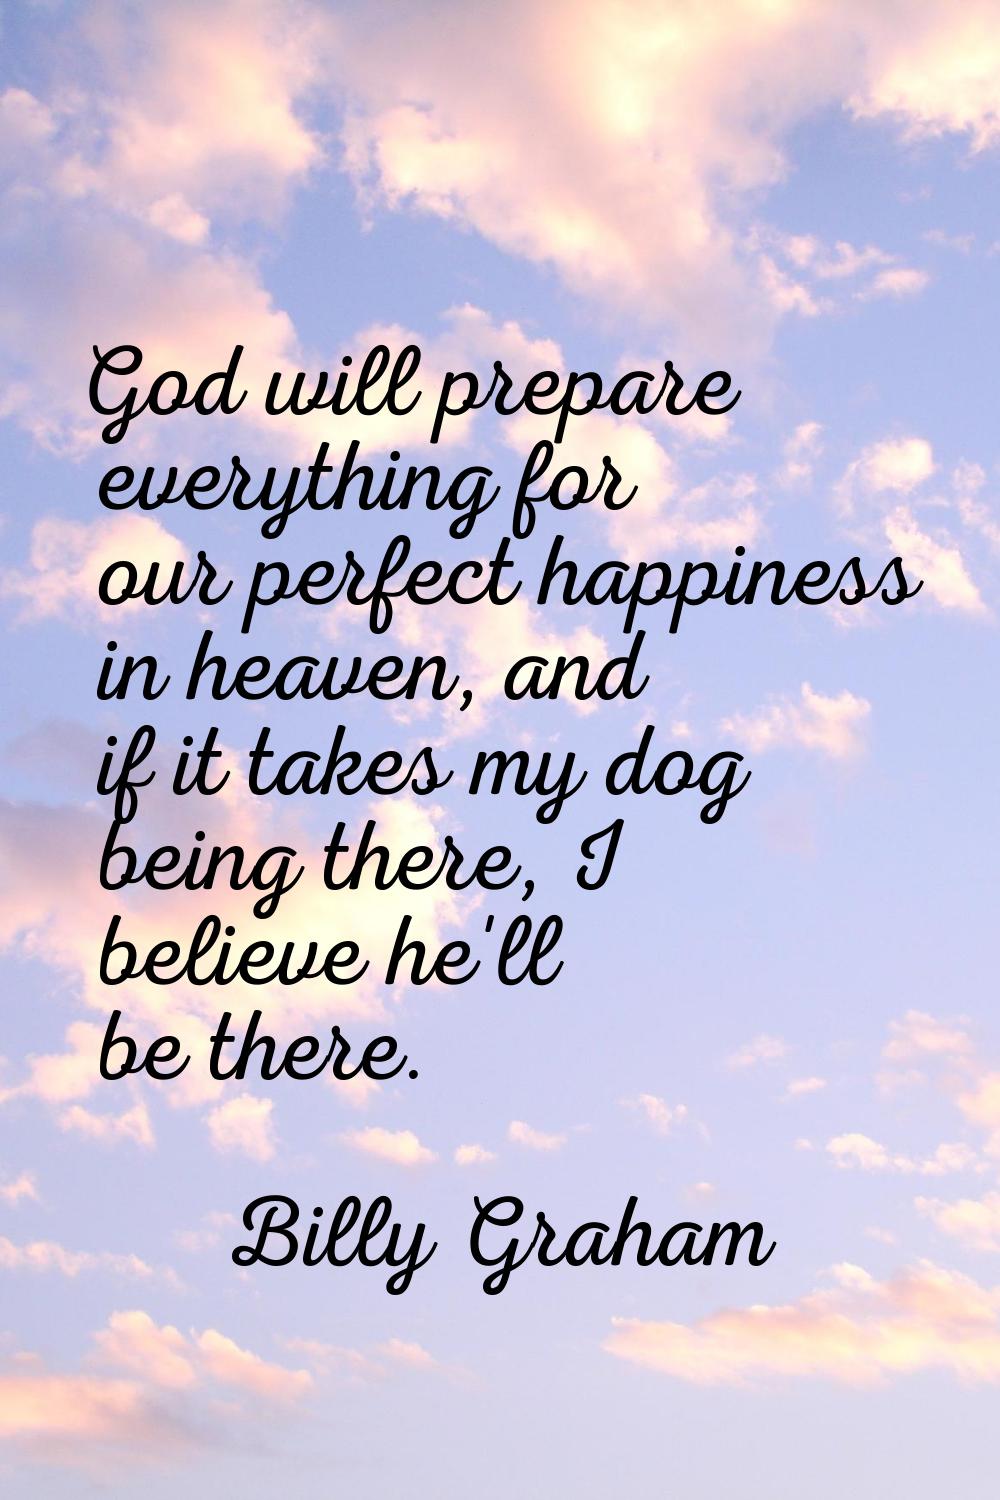 God will prepare everything for our perfect happiness in heaven, and if it takes my dog being there